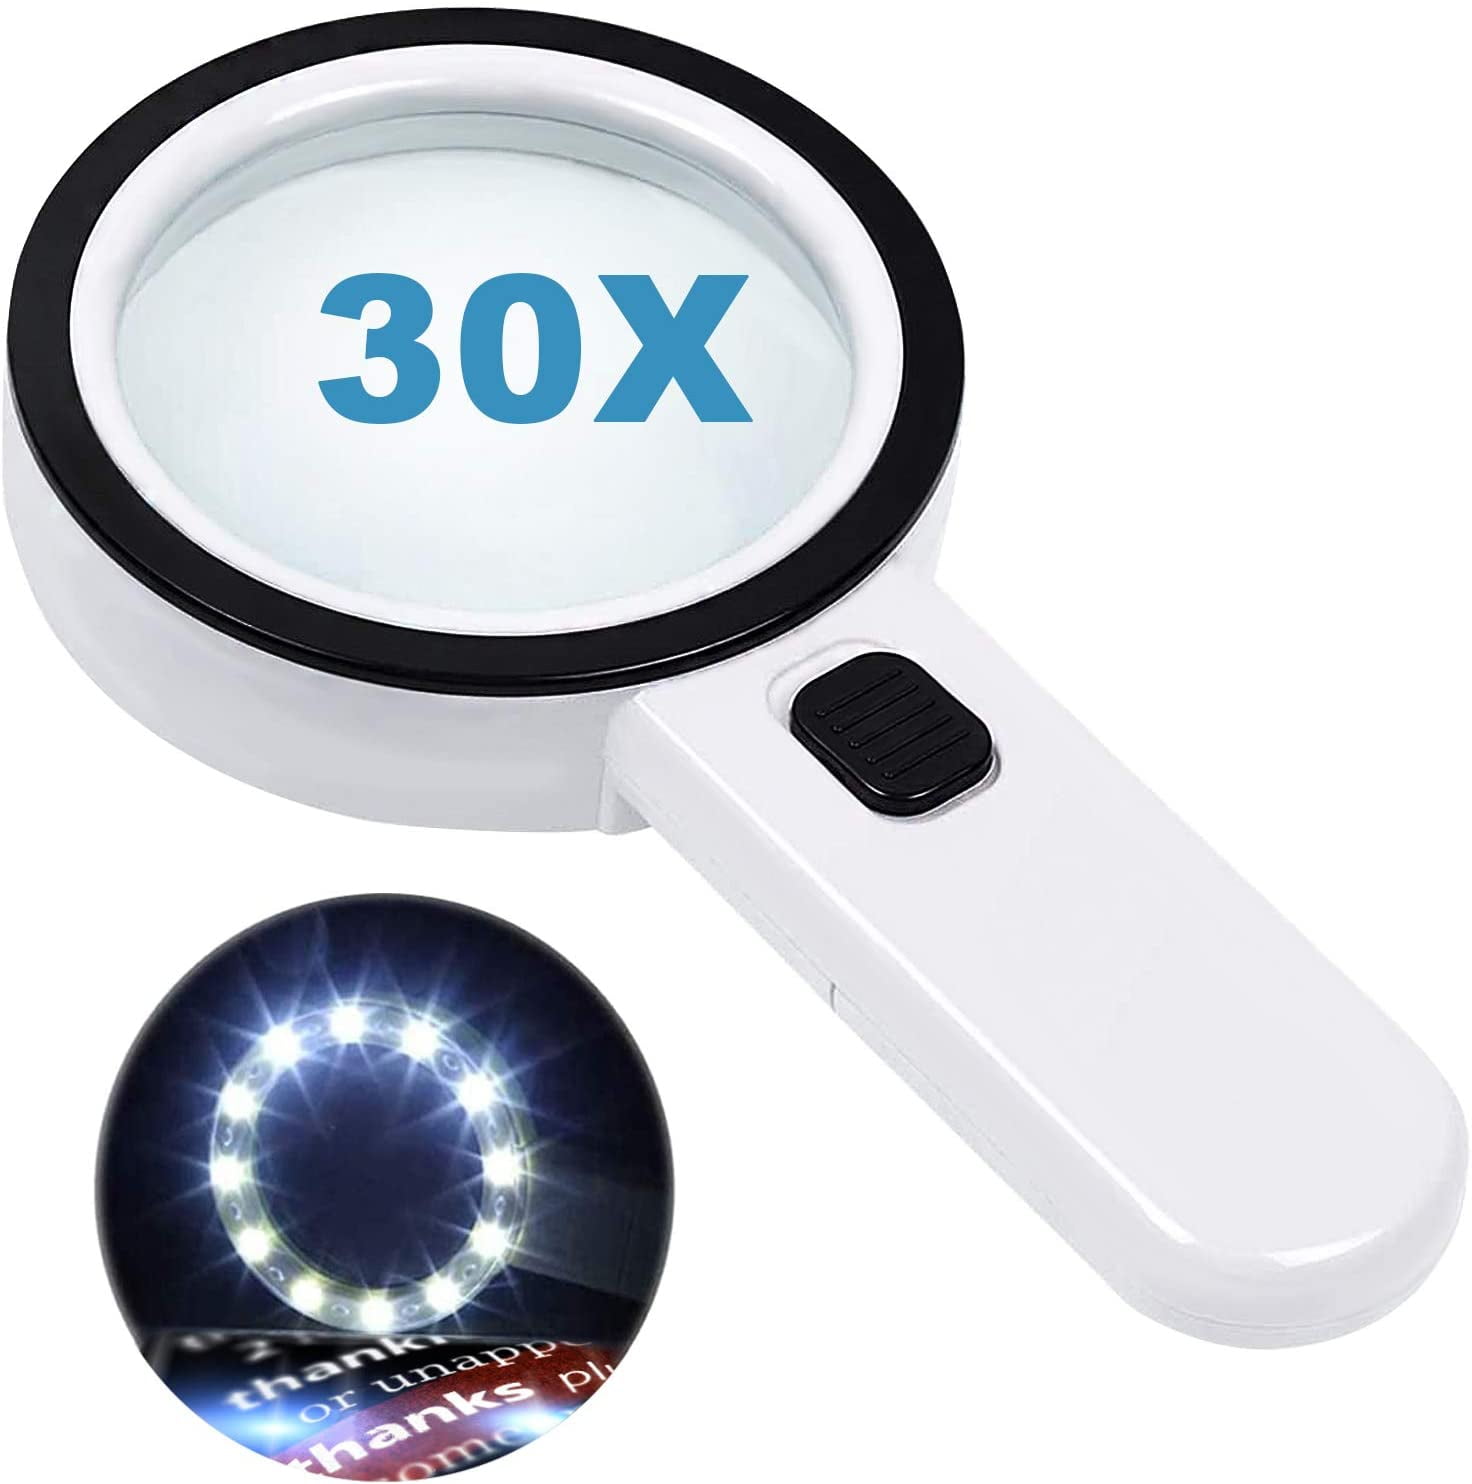 Wideskall 4 inch Large Handheld Magnifying Glass 3X Power REAL Glass  Magnifier